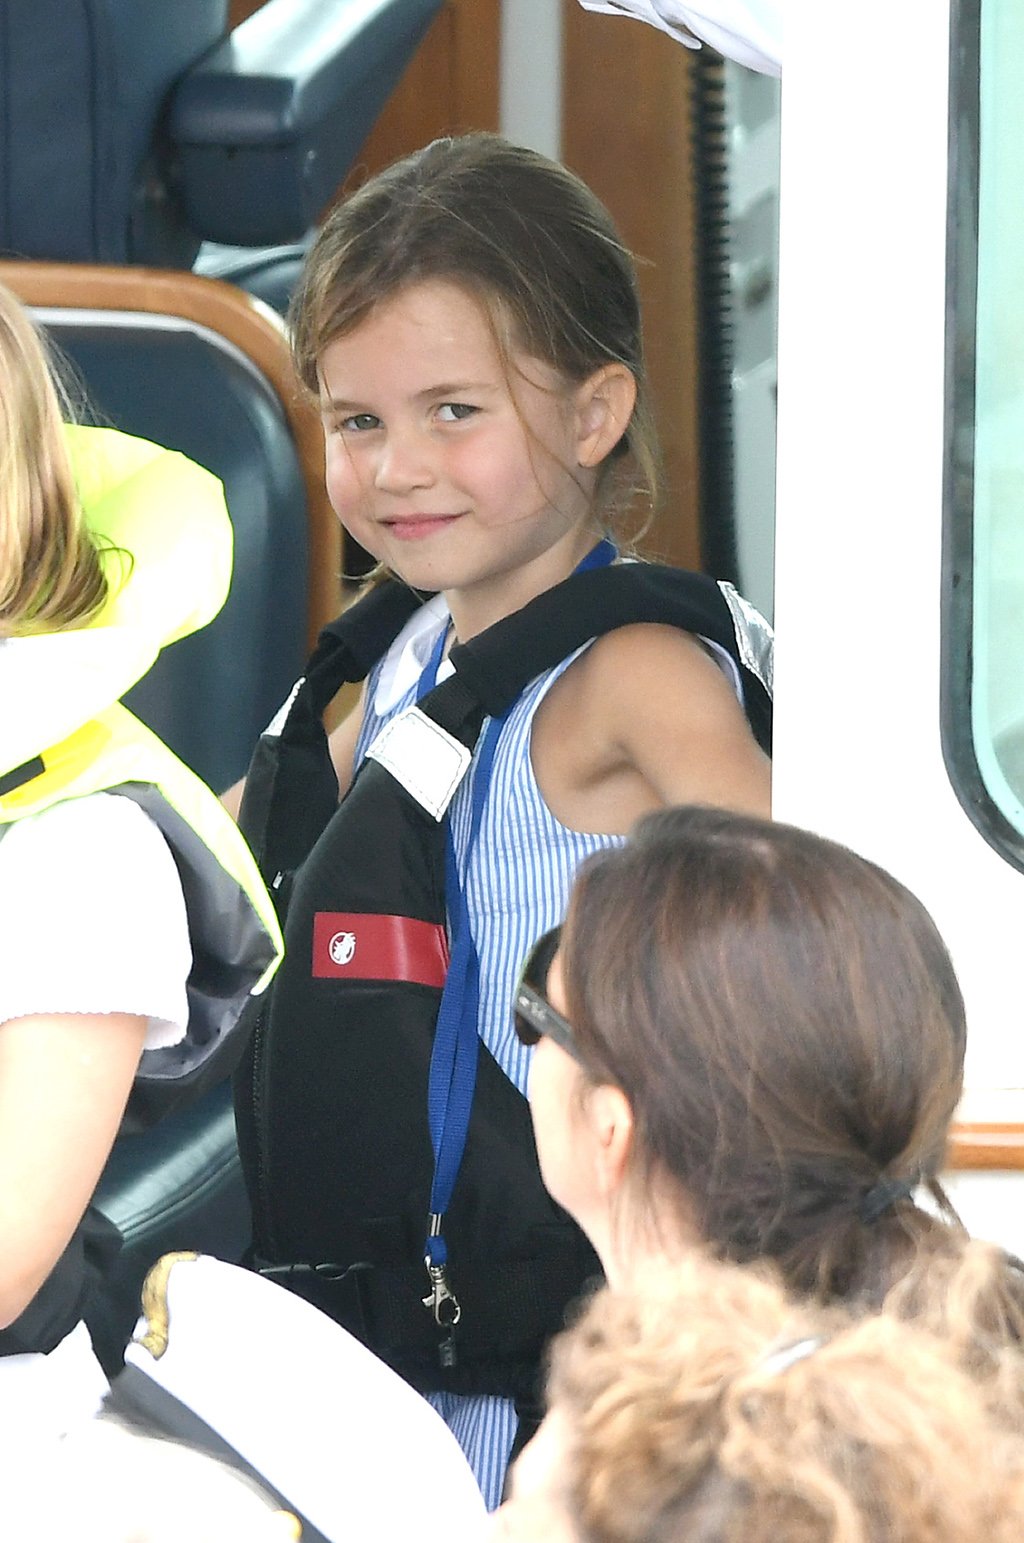 Princess Charlotte boating in a striped blue dress and life jacket